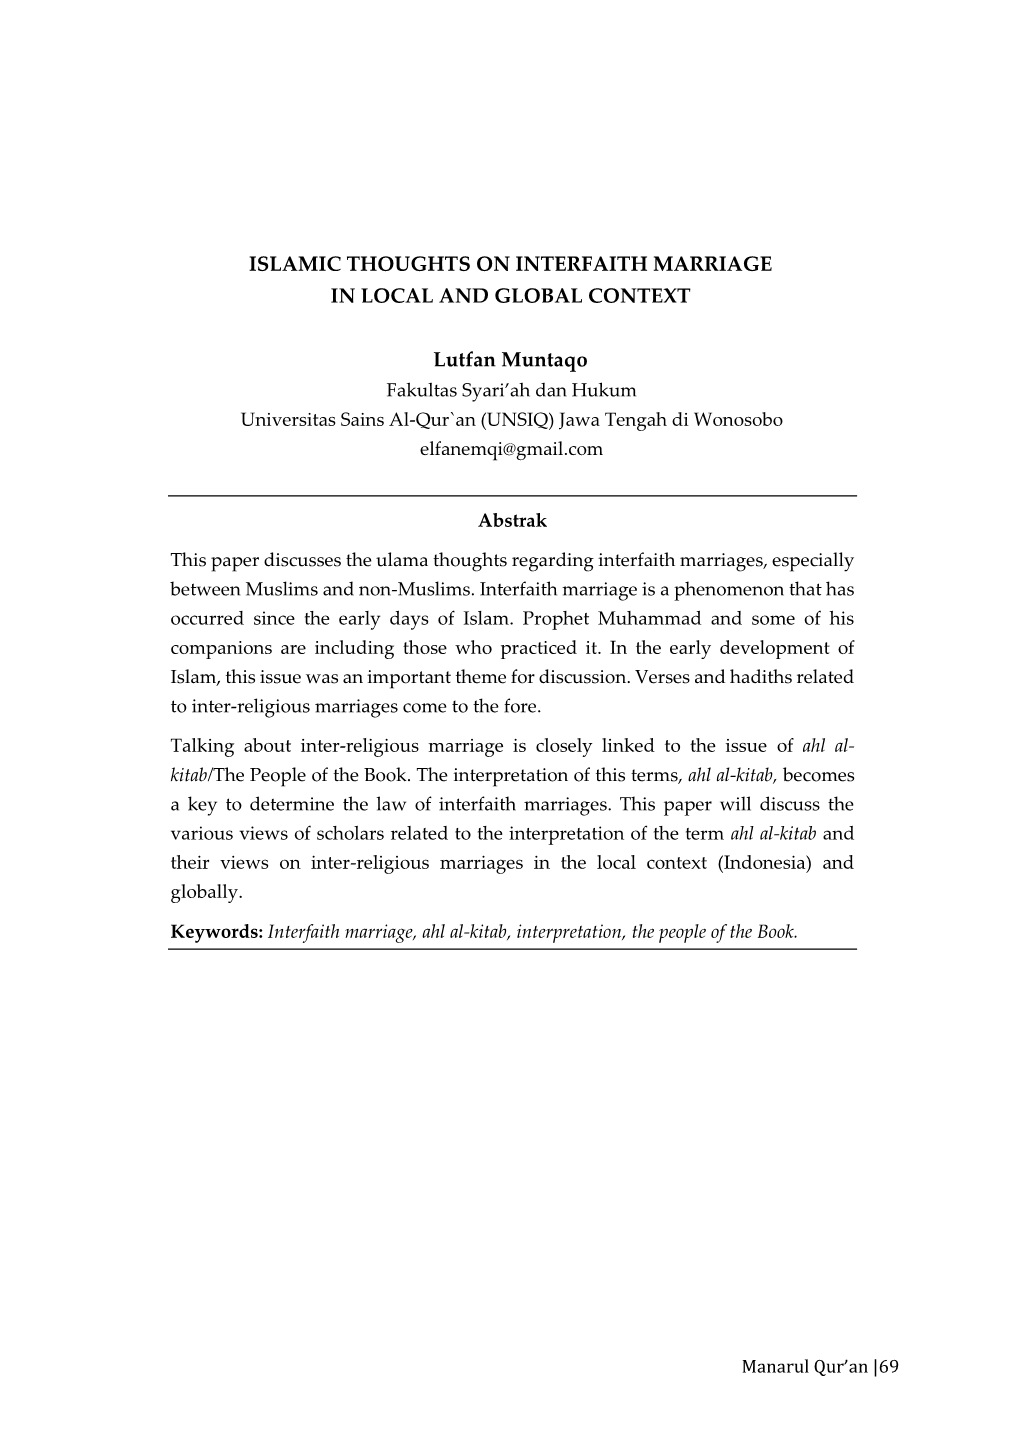 Islamic Thoughts on Interfaith Marriage in Local and Global Context